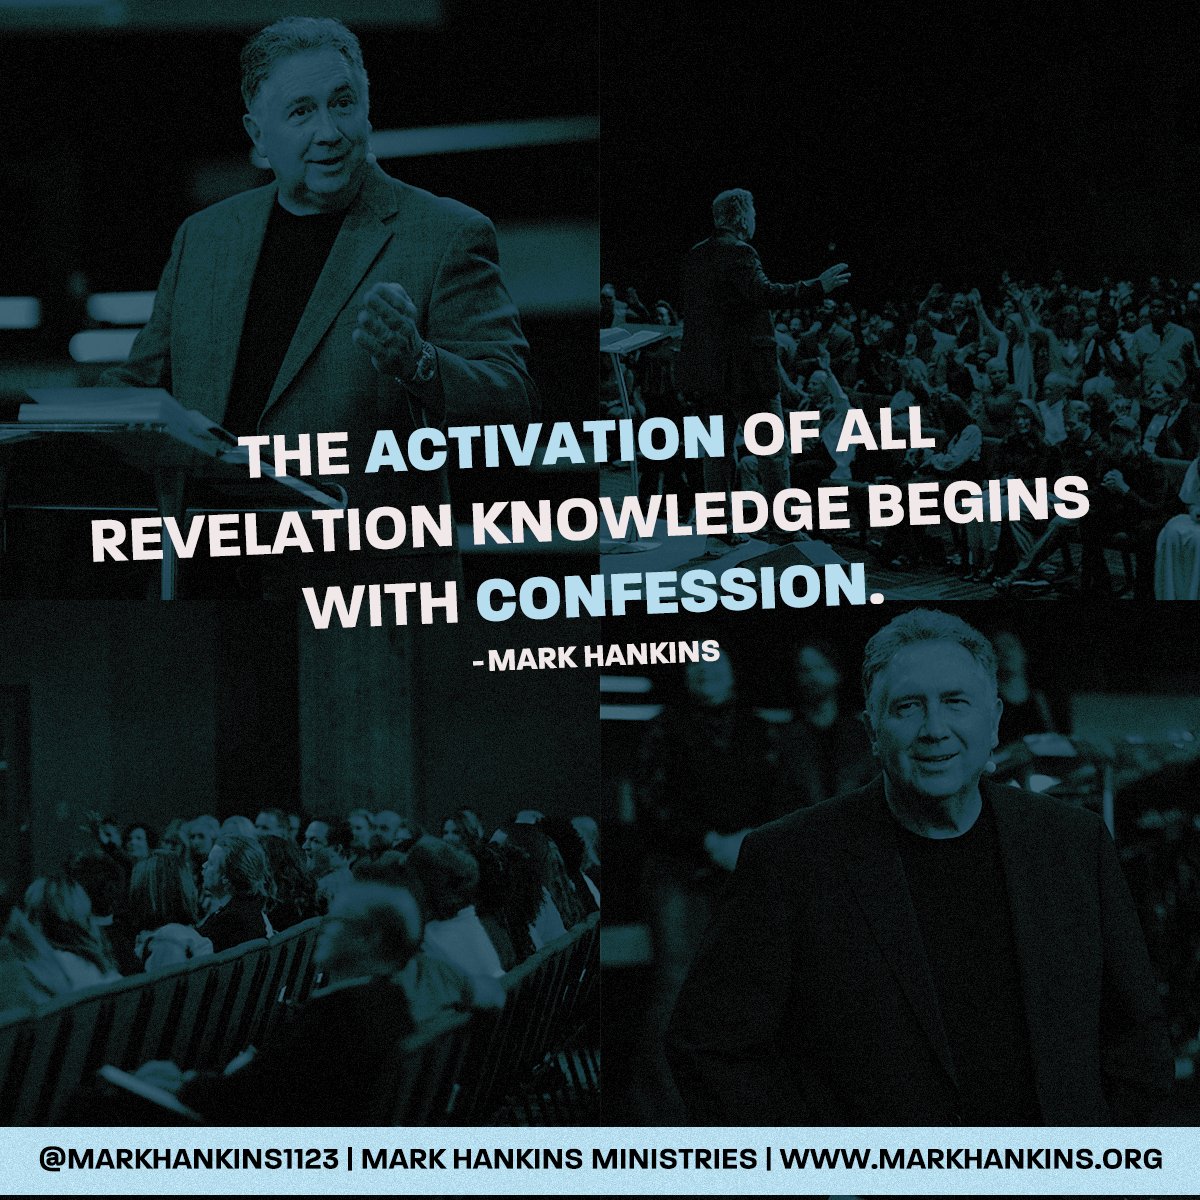 'The ACTIVATION of all revelation knowledge begins with CONFESSION.' - Mark Hankins #feedyourfaith #markhankins